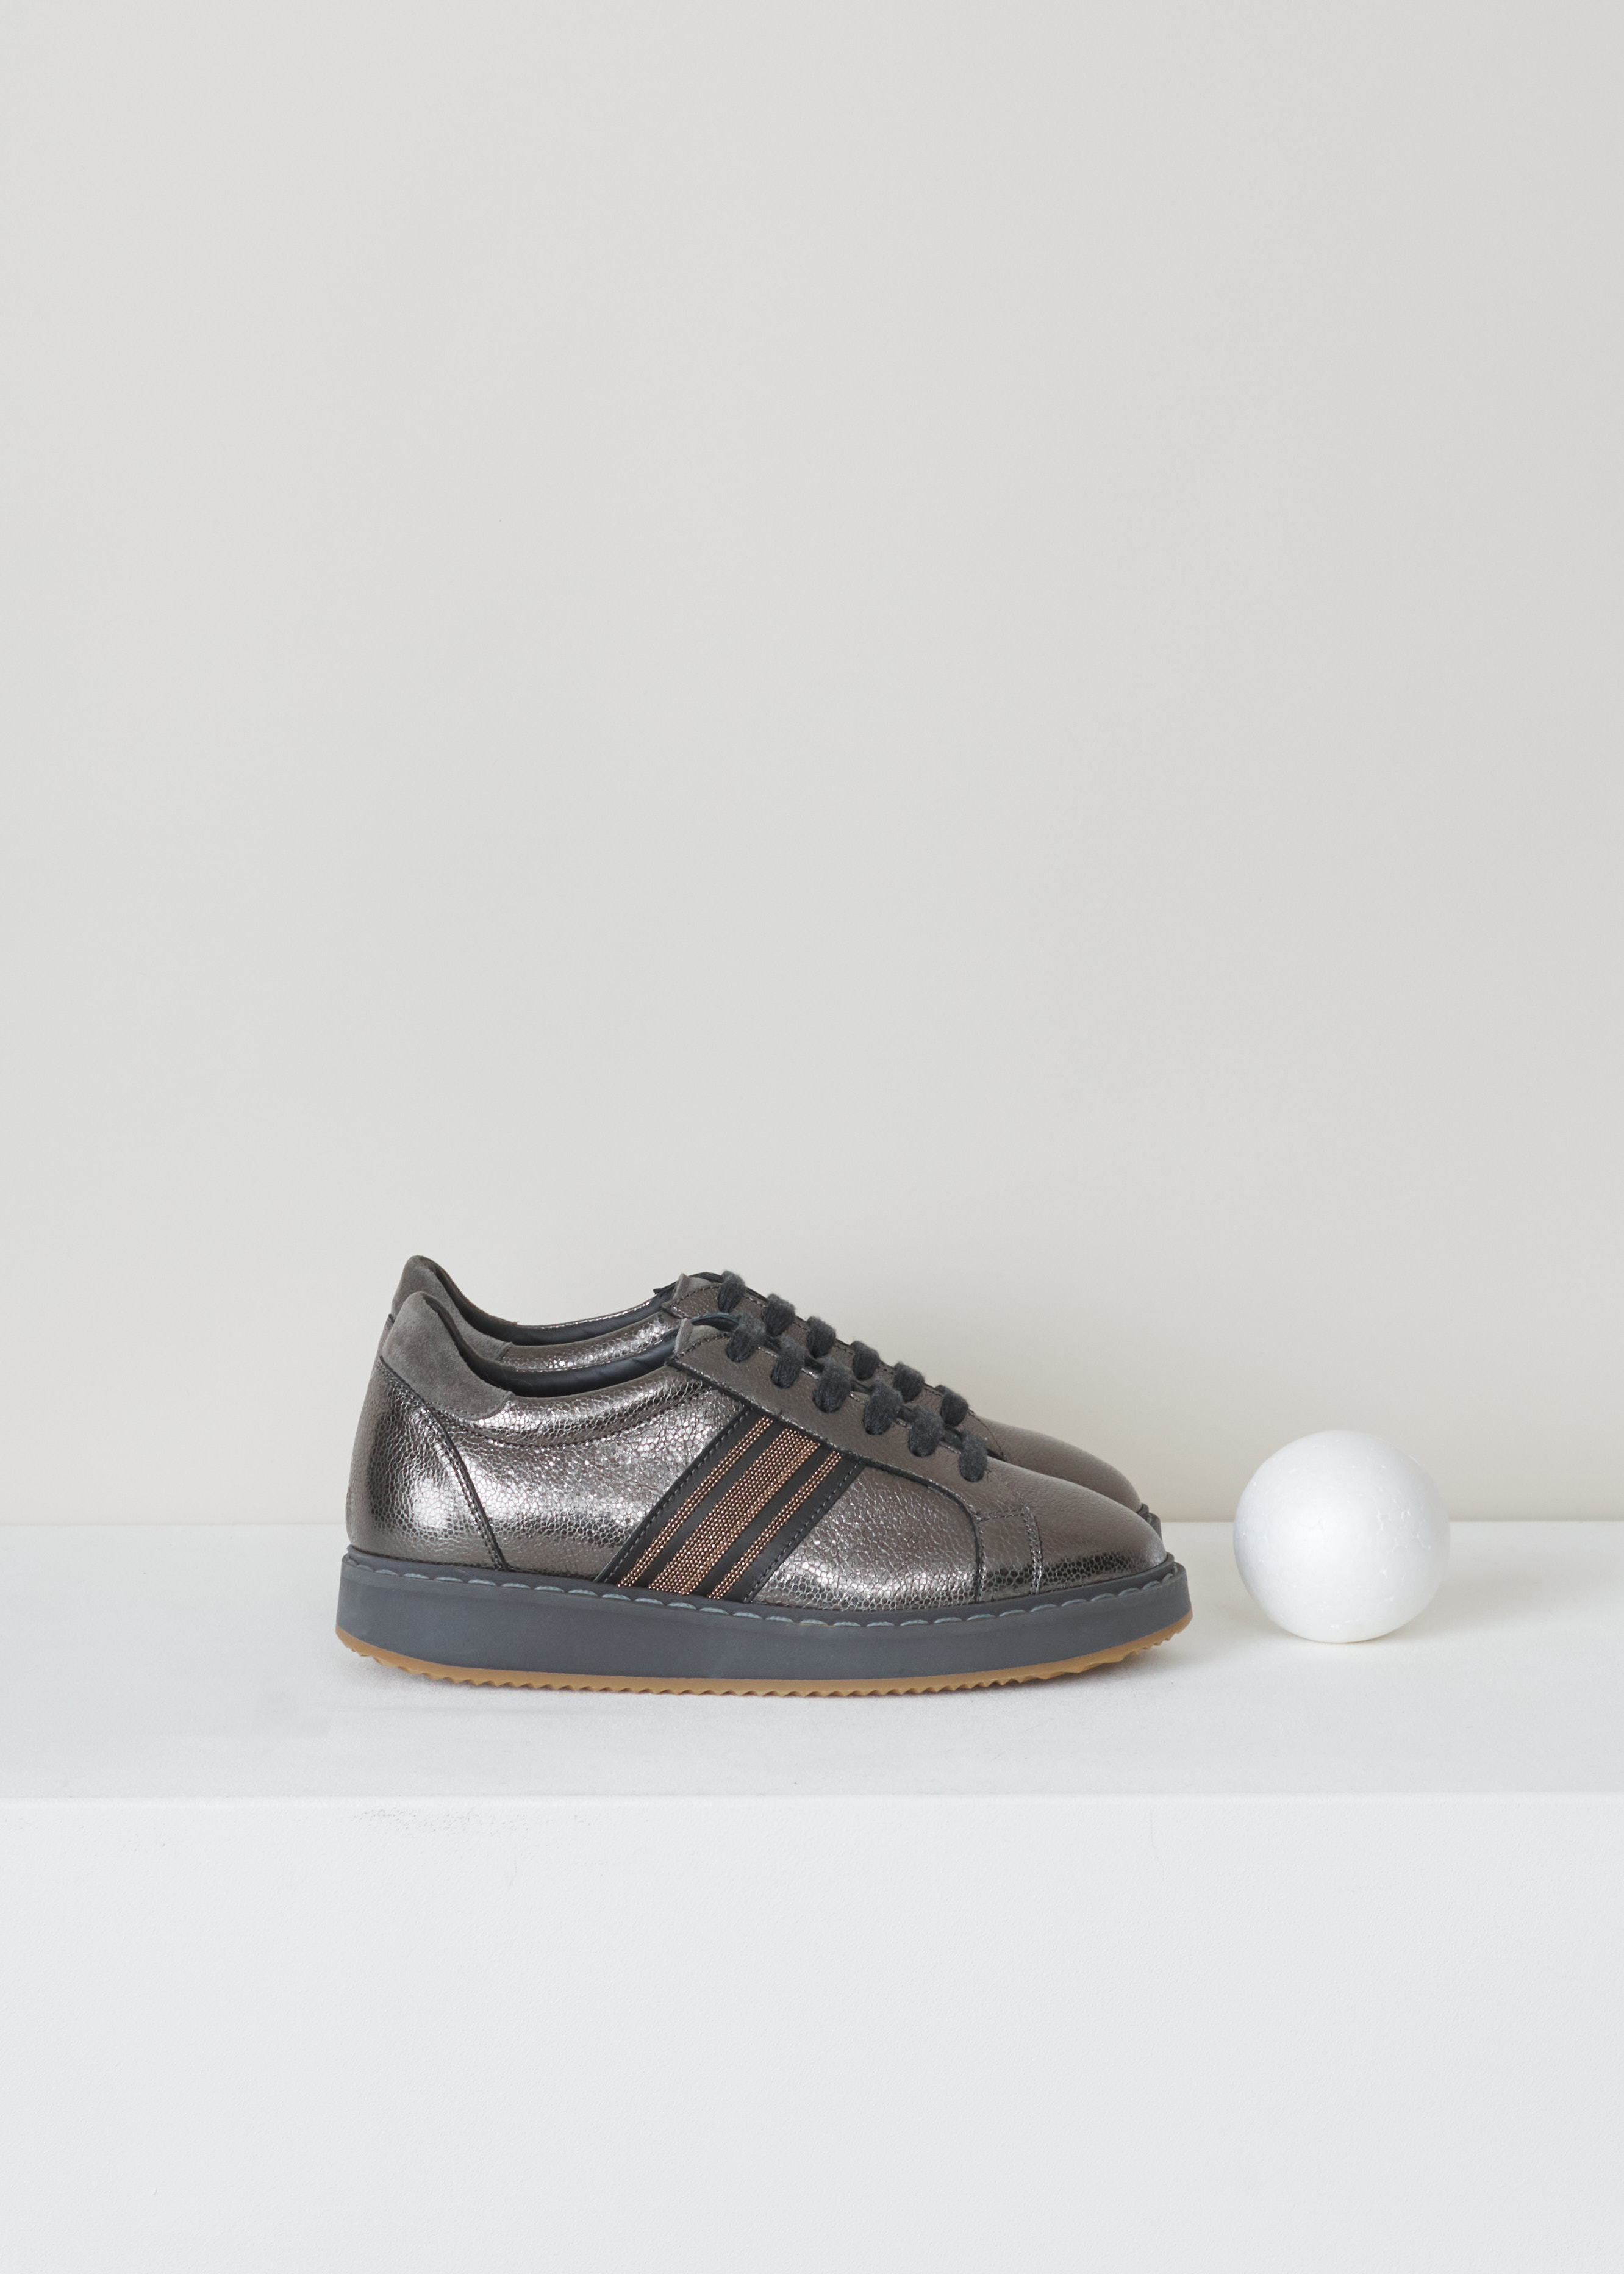 Brunello Cucinelli Metallic sneakers MZBUG1324_C2126 metallic side. Metallic leather sneaker with a round toe, rose gold beading on the side, cashmere shoelaces, a leather inner and a rubber sole.